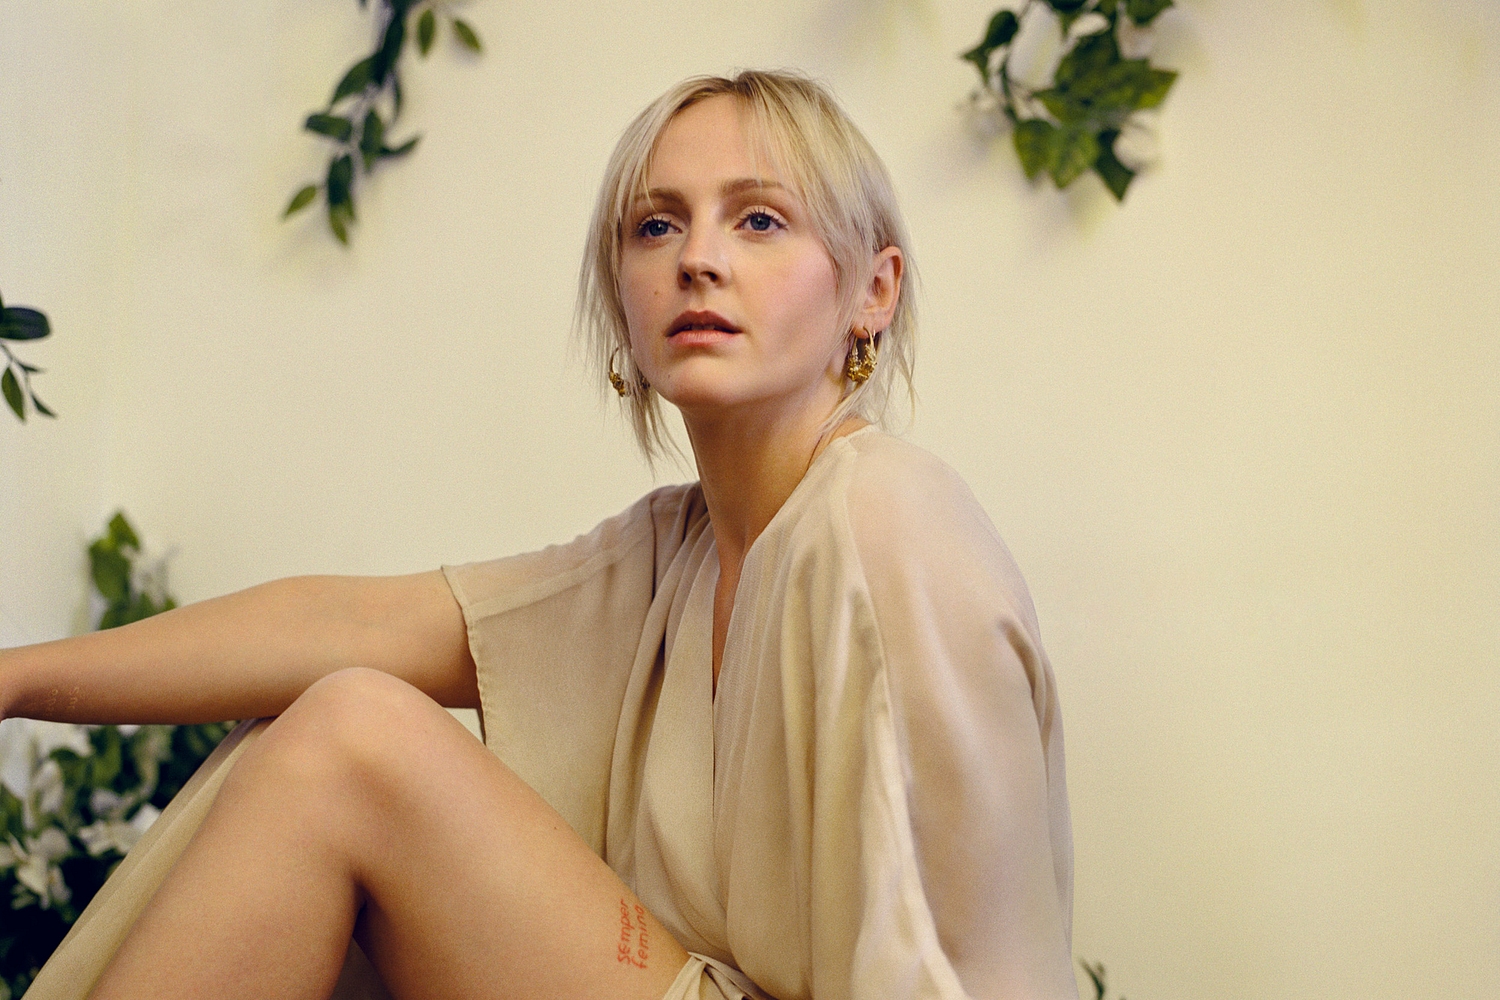 Tracks: Laura Marling, Run the Jewels, and more